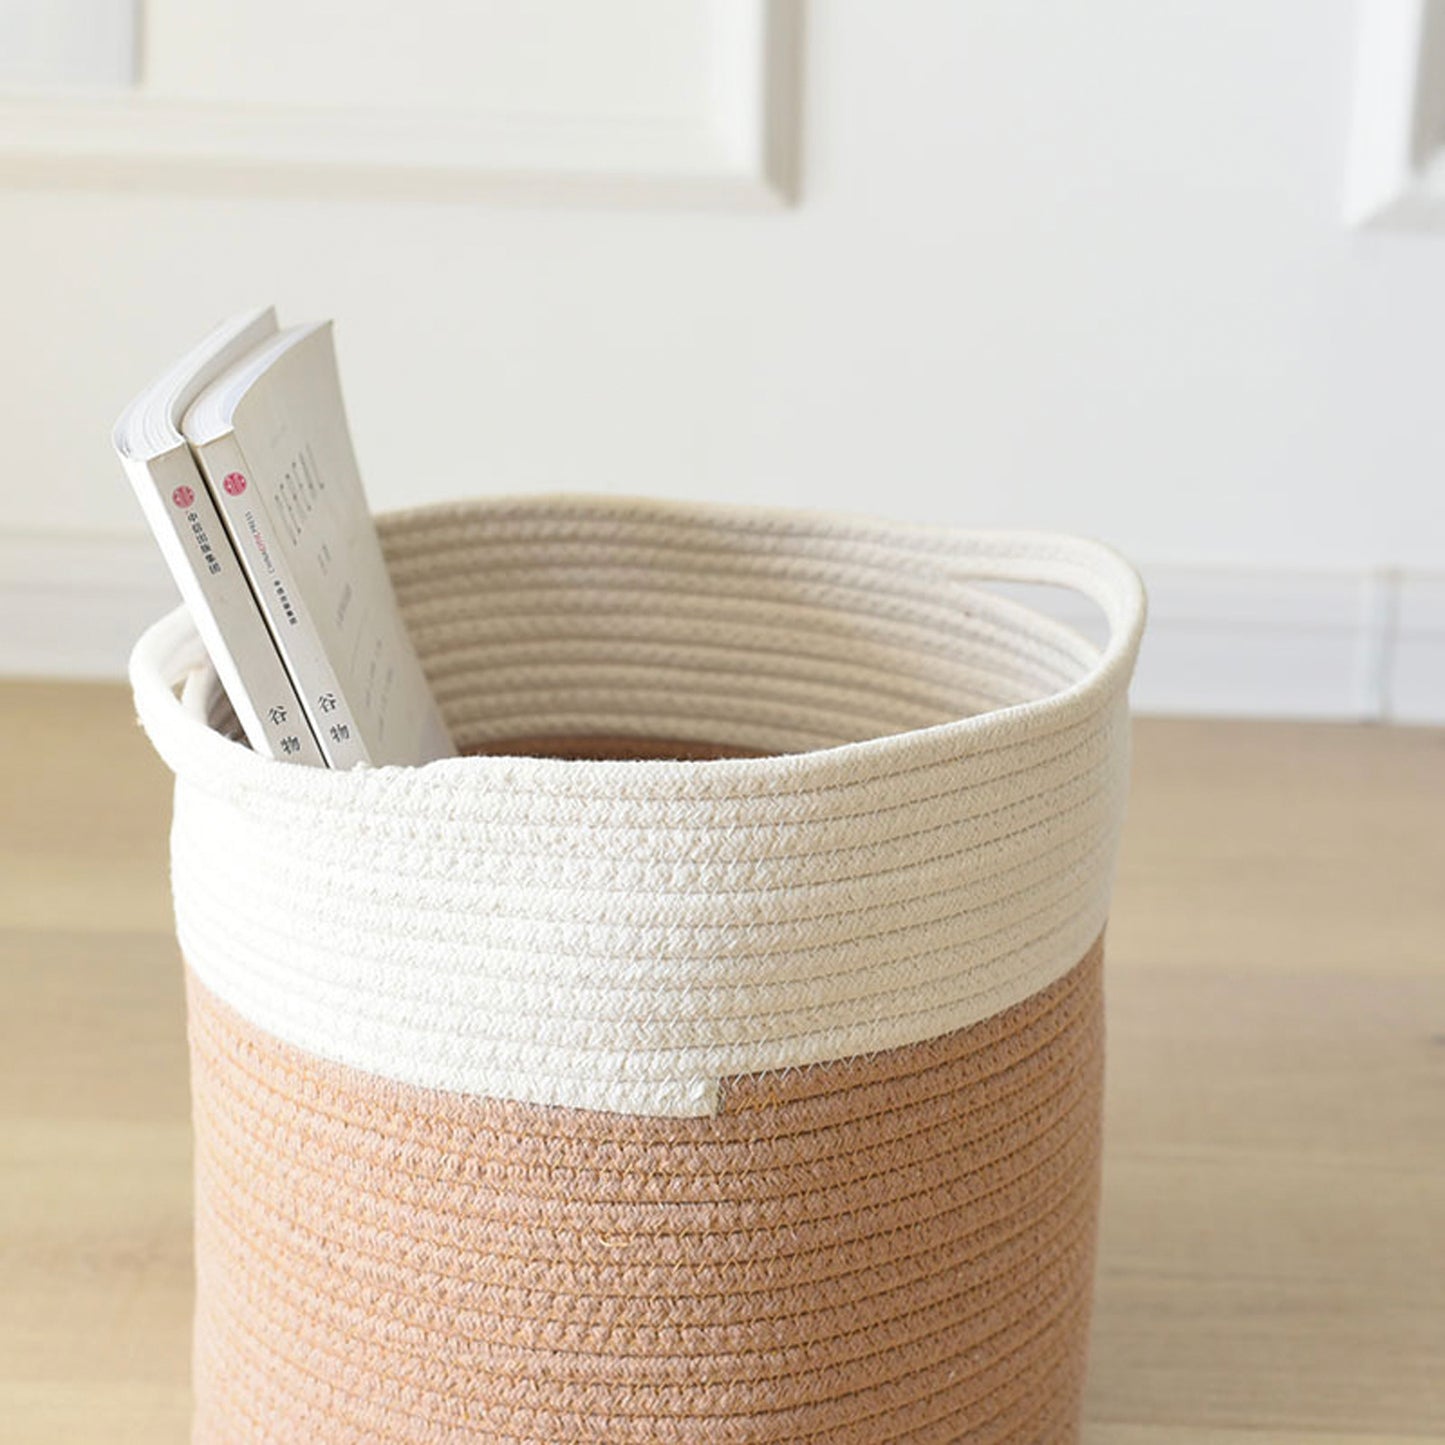 Cotton Rope Woven Basket